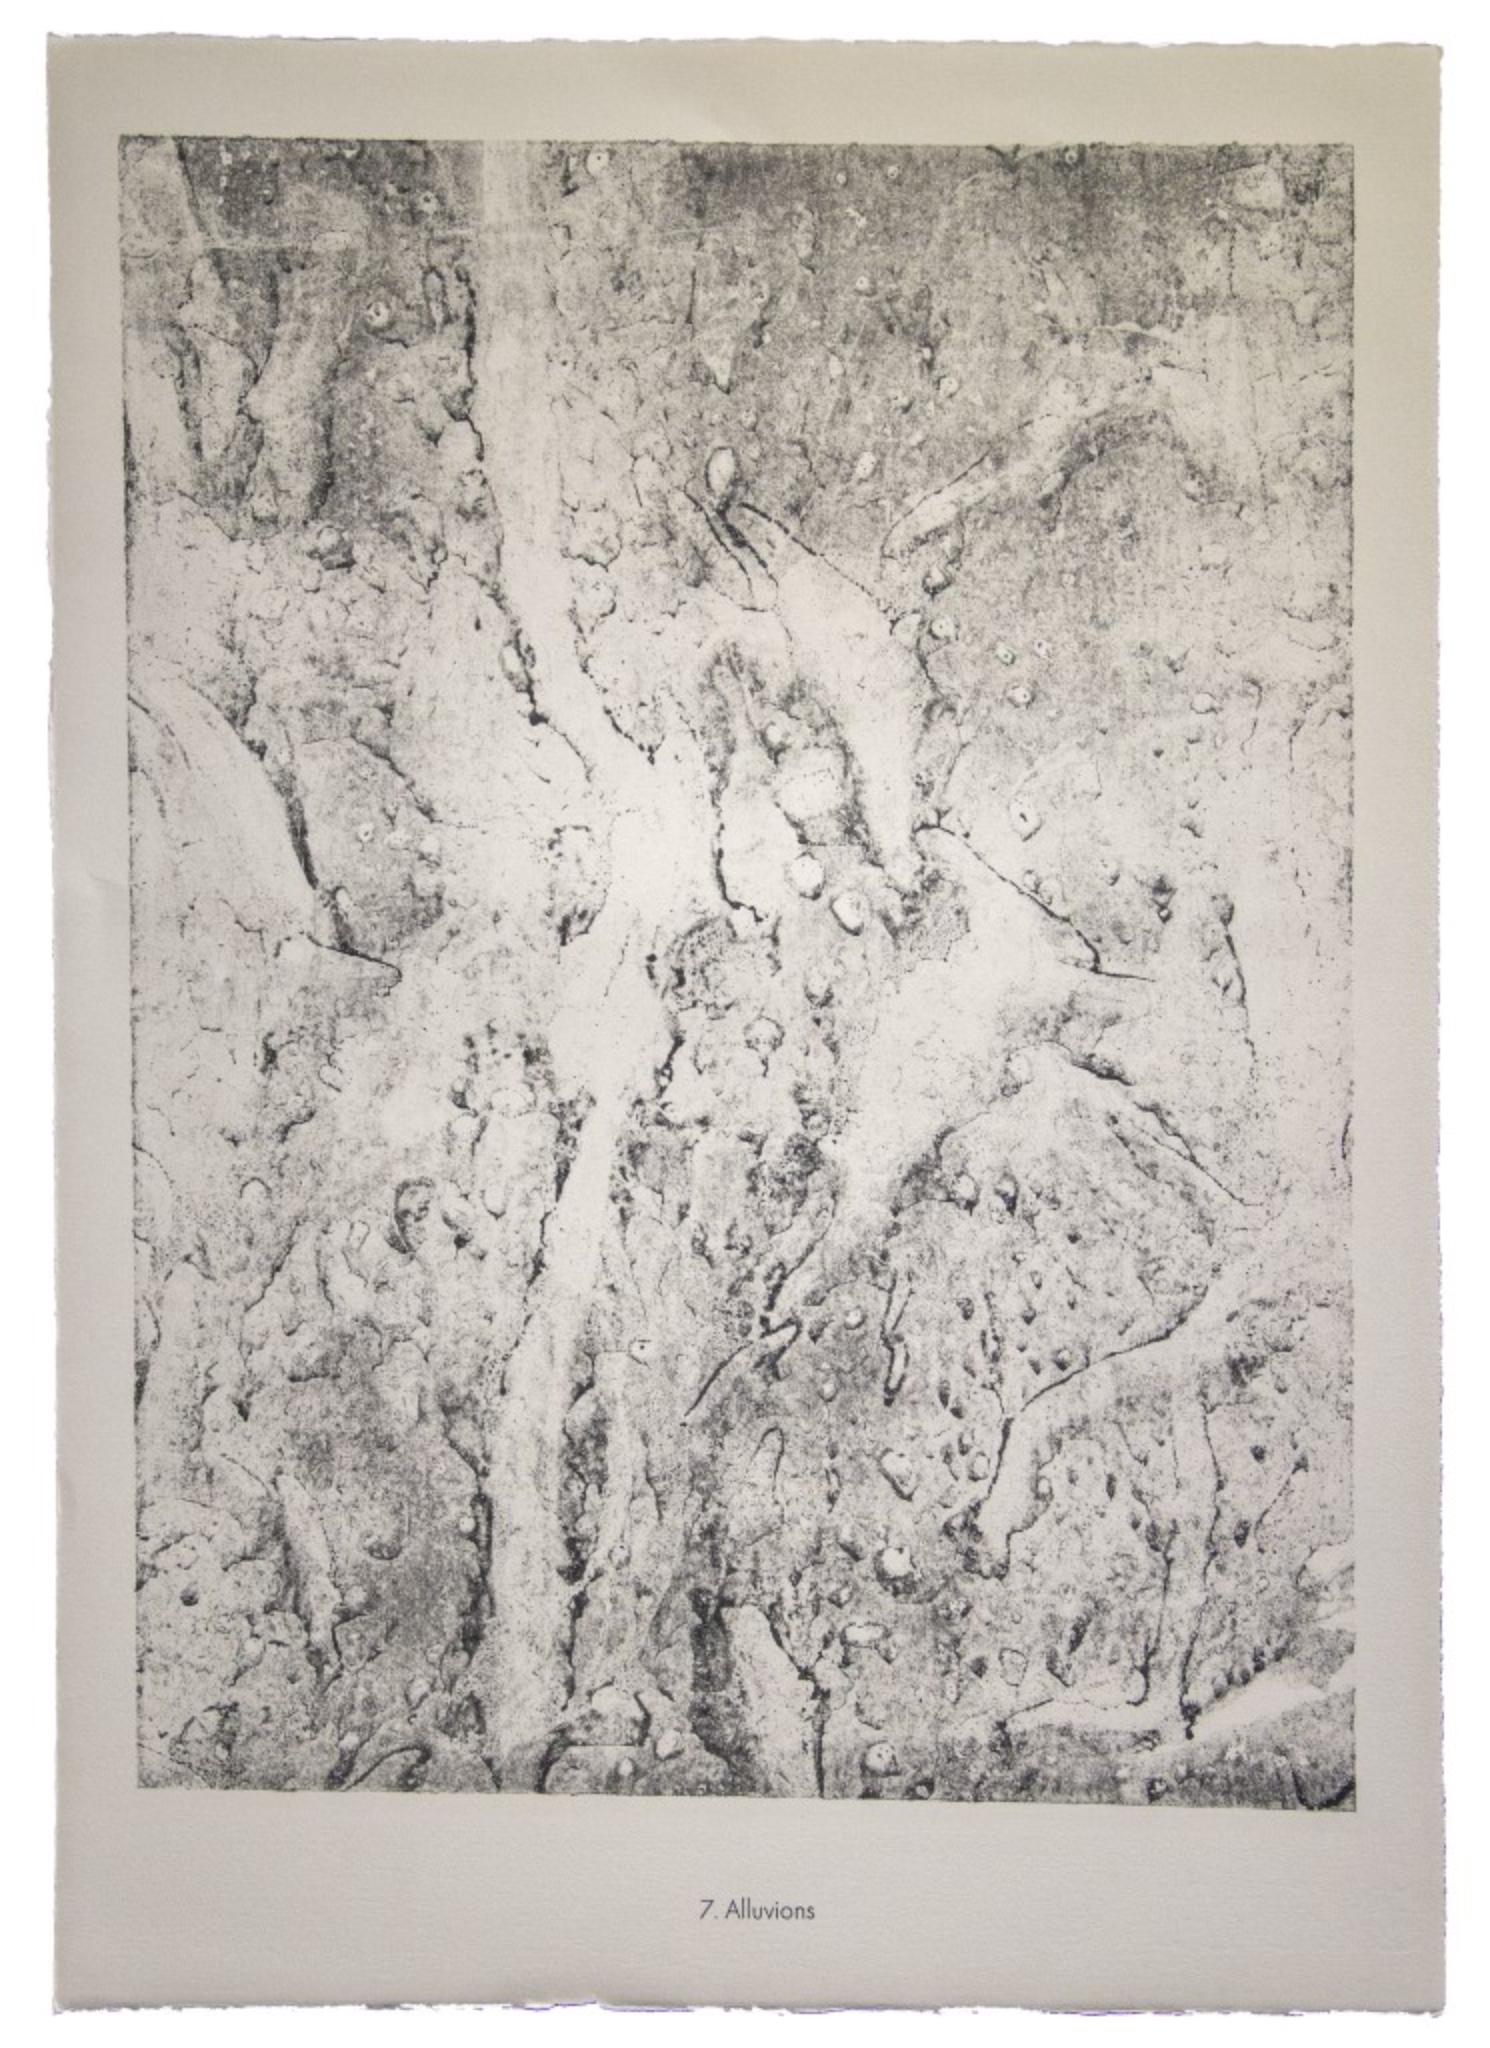 Alluvions - Original Lithograph by Jean Dubuffet - 1959